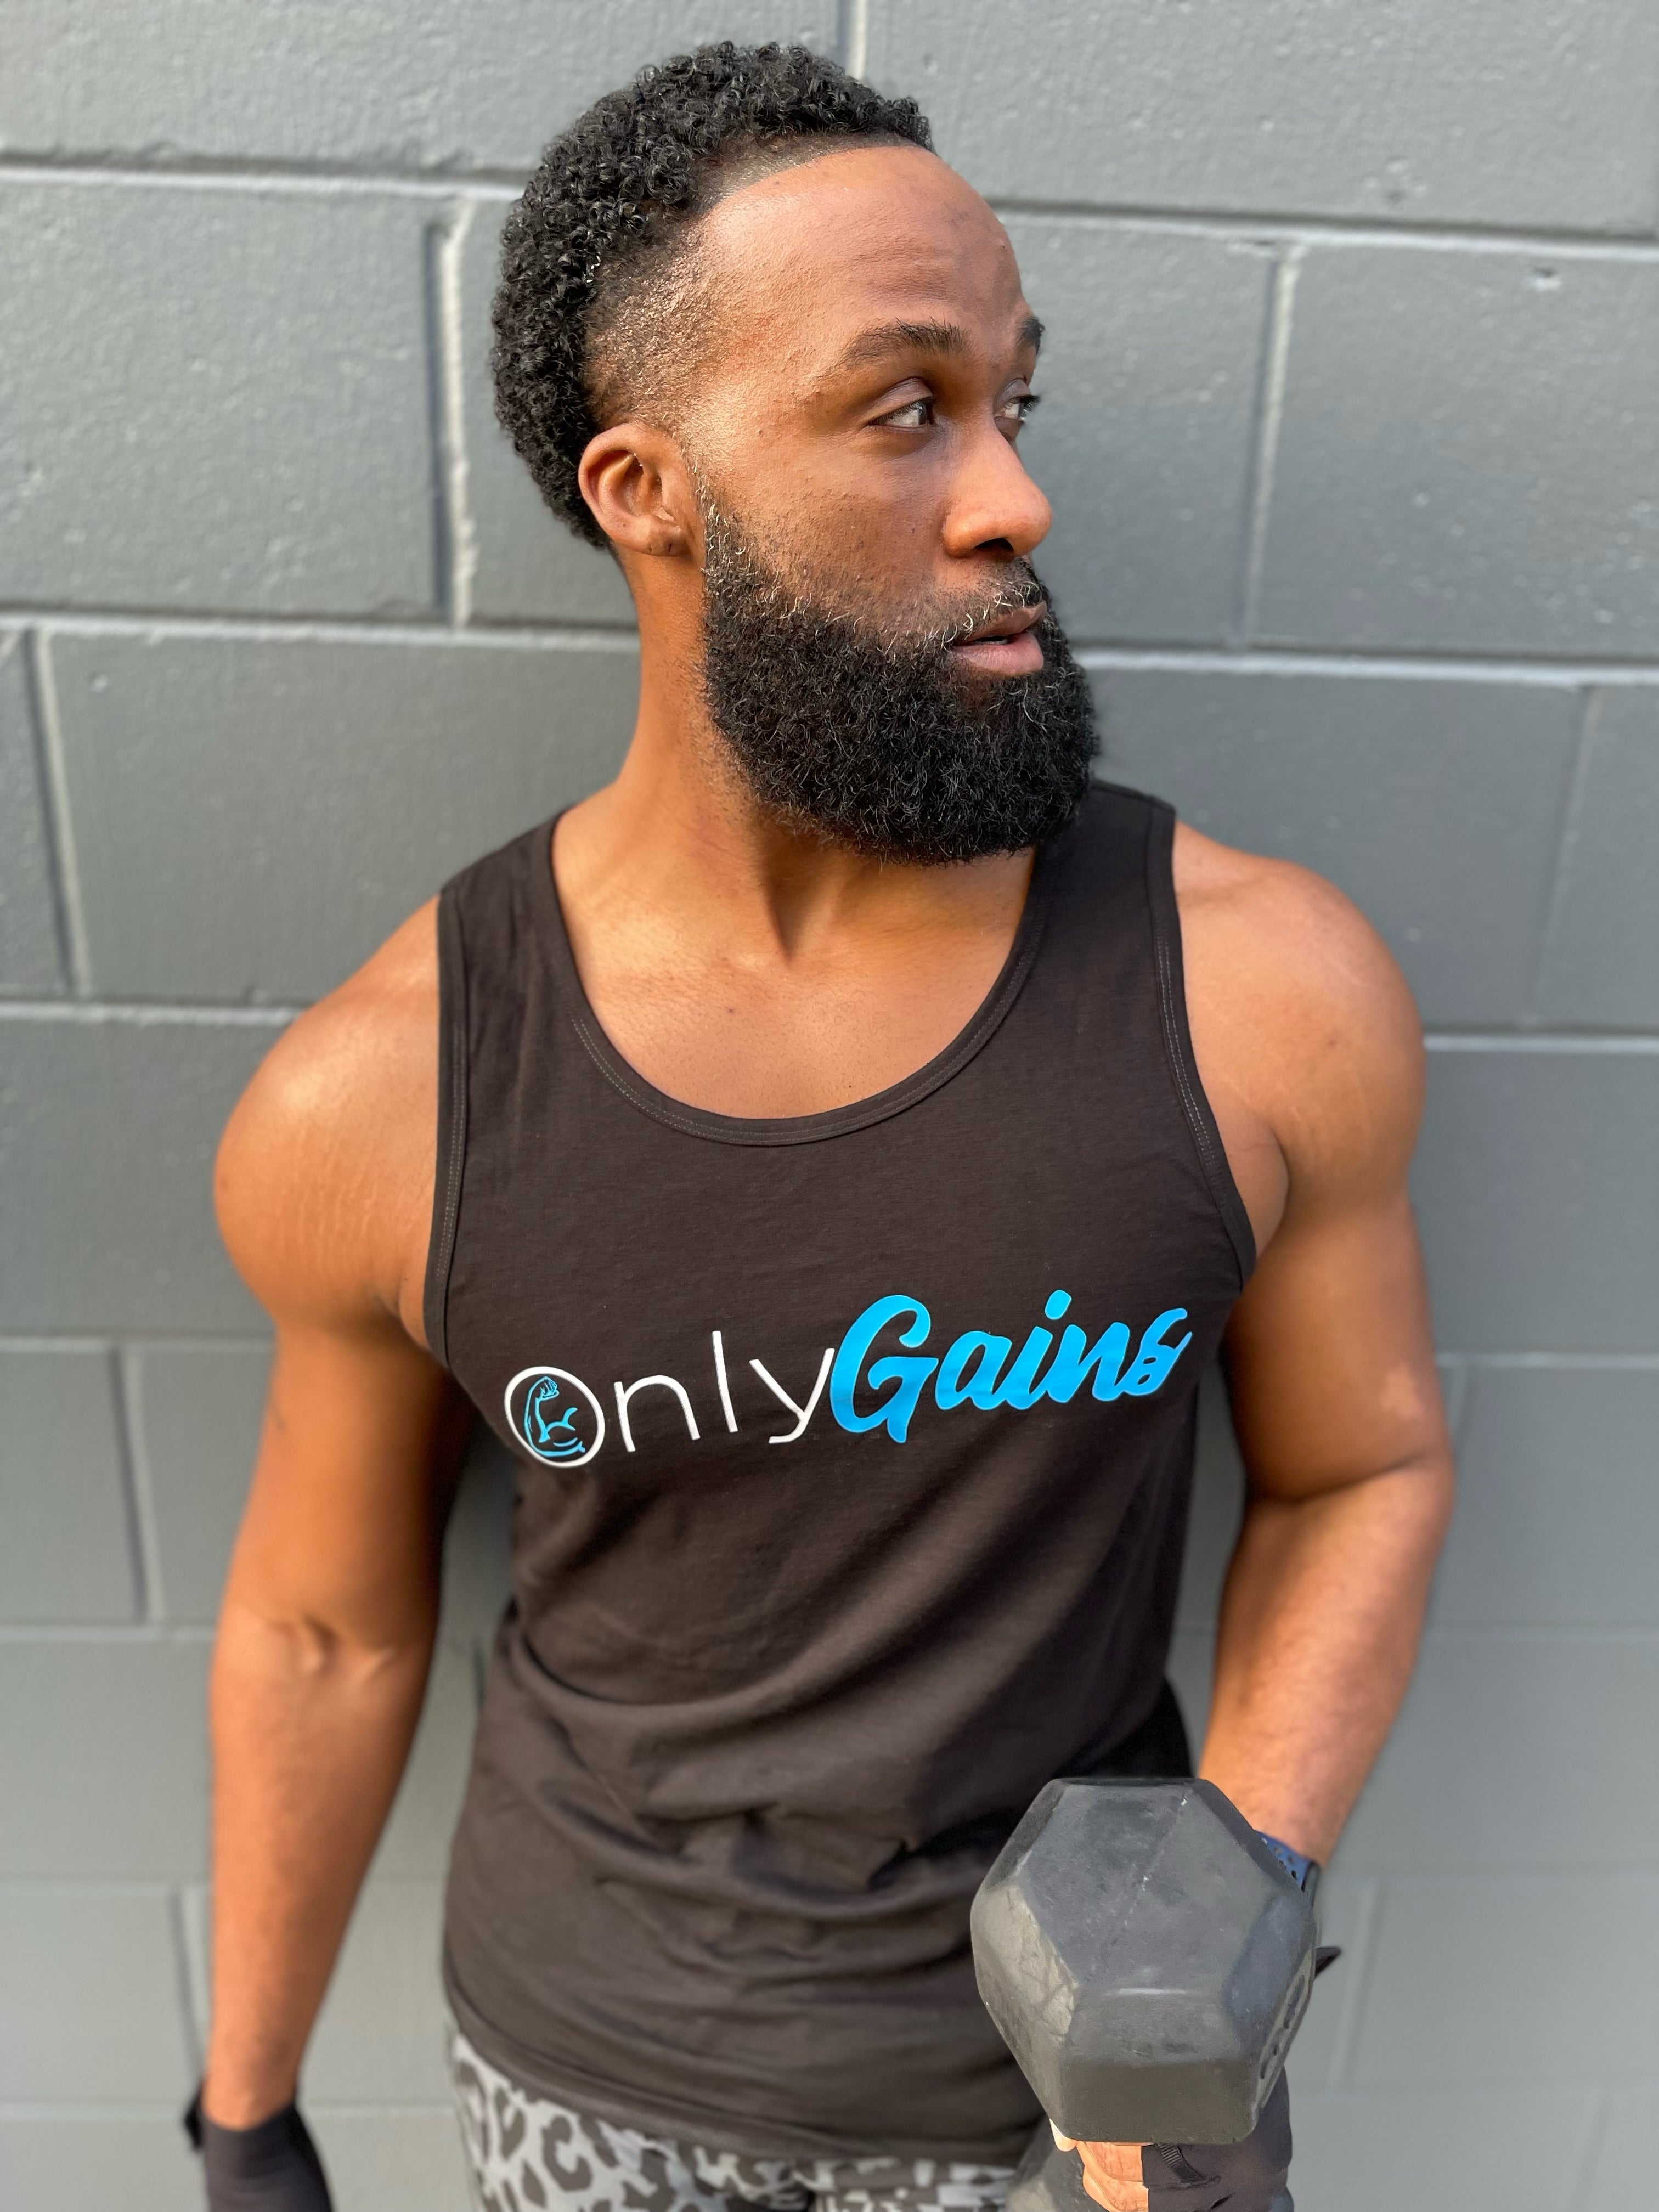 Lulu Grace Designs Only Gains Shirt: Funny Men’s Fitness & Everyday Workout Apparel S / Men's Tank